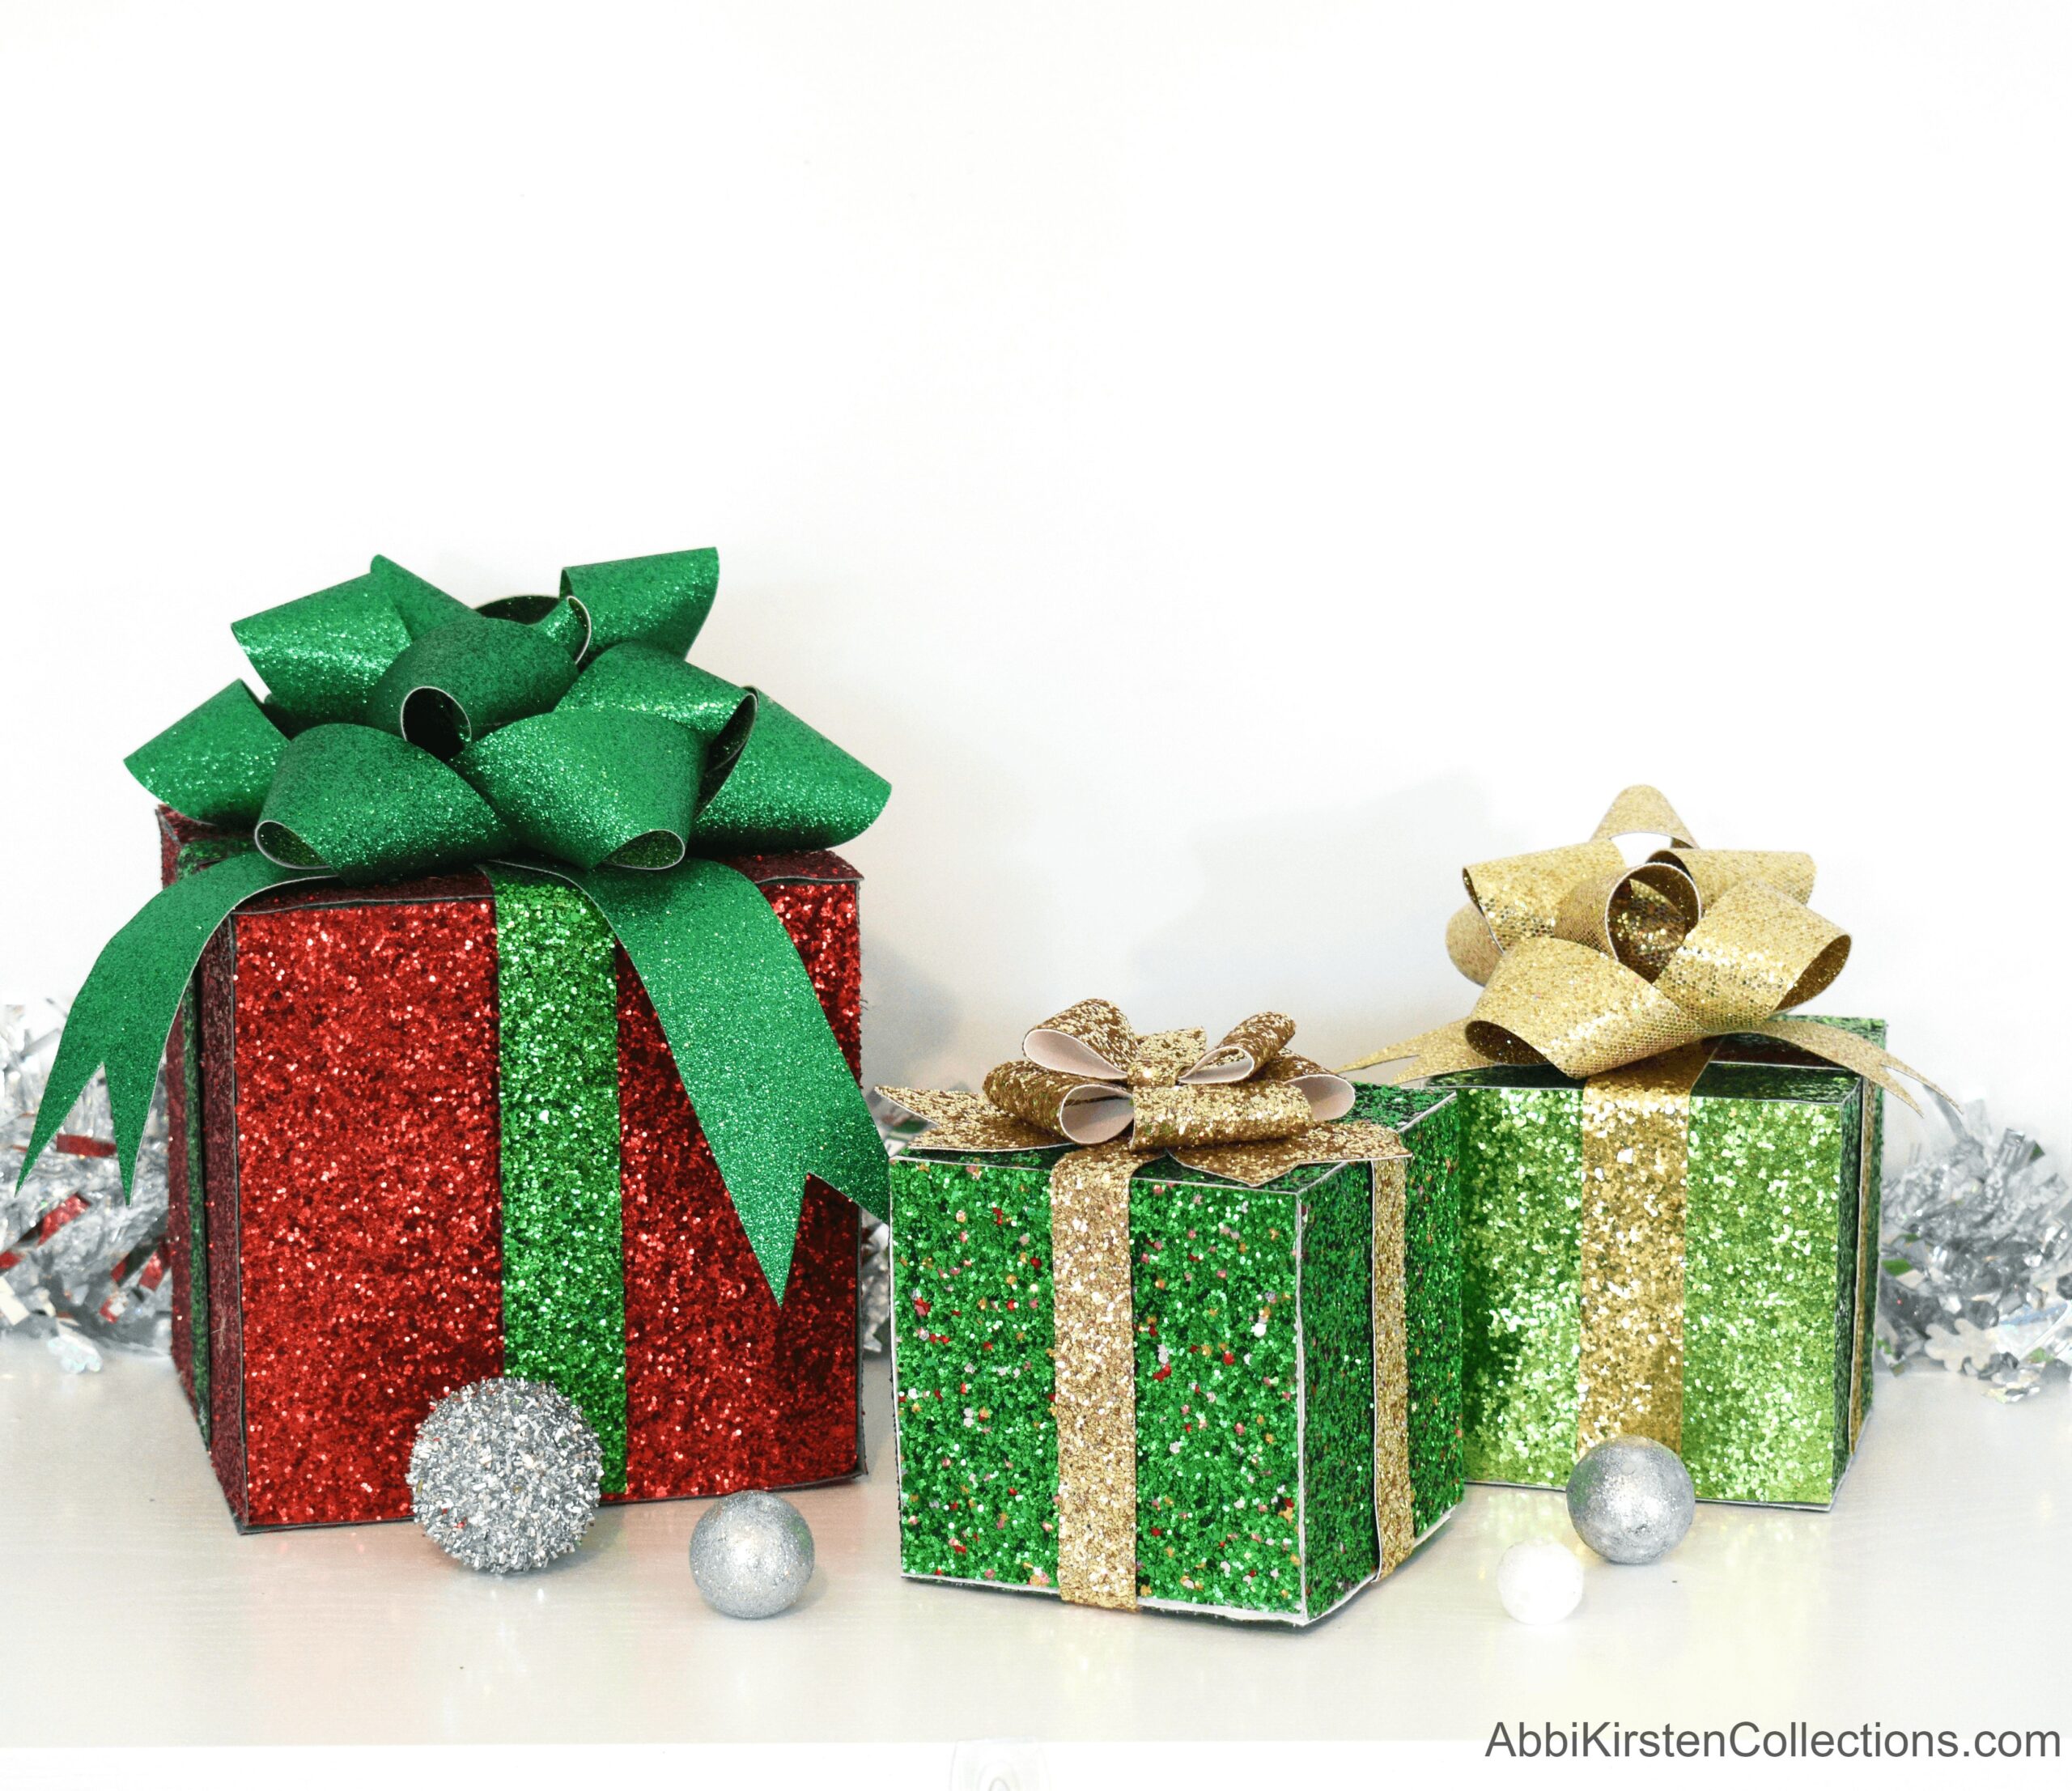 Three decorative gift boxes of different sizes, covered in red and green faux glittery leather sheets and topped with green and silver bows. Silver ornaments and tinsel surround the presents on the floor.